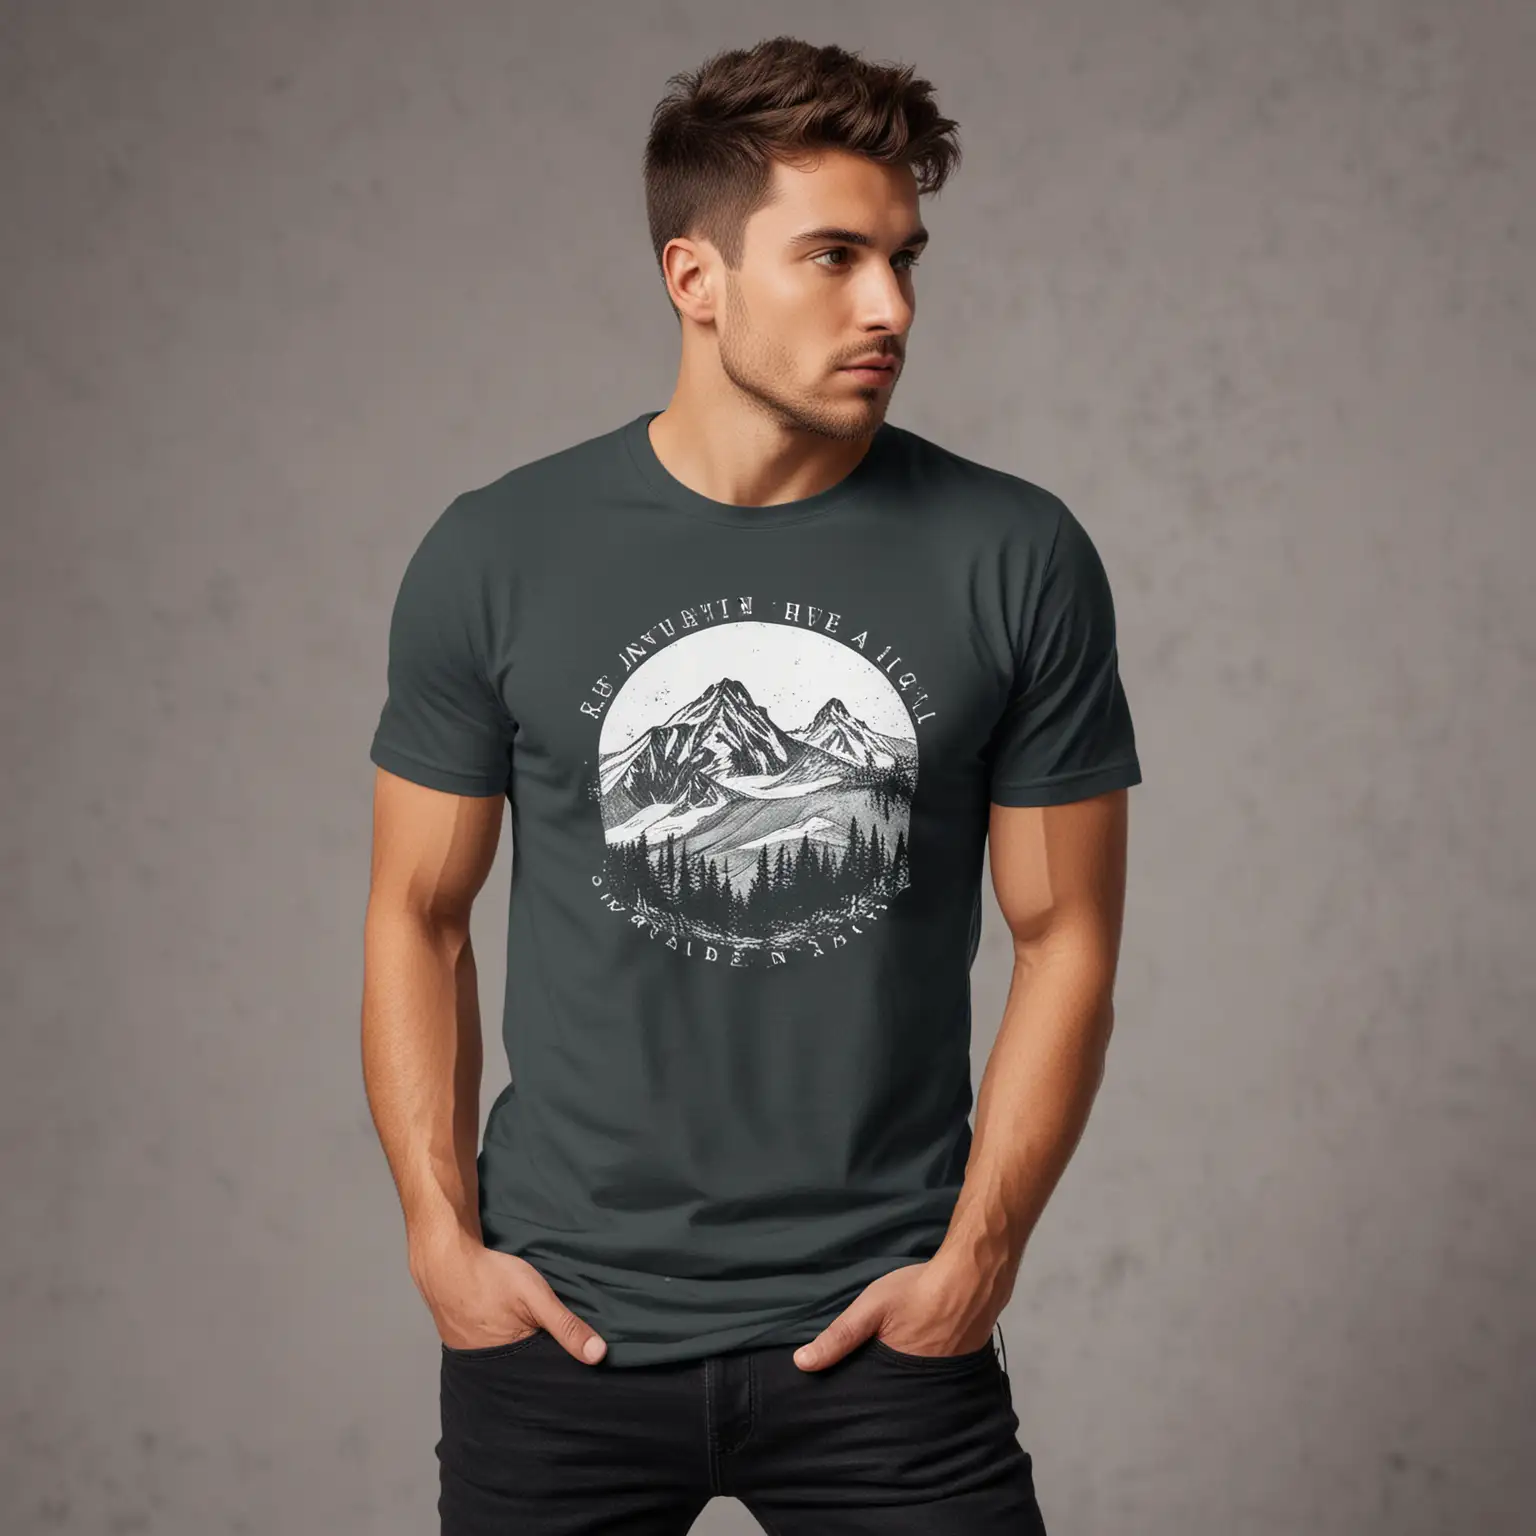 Custom Printed TShirts Clothing Website Images for Print on Demand